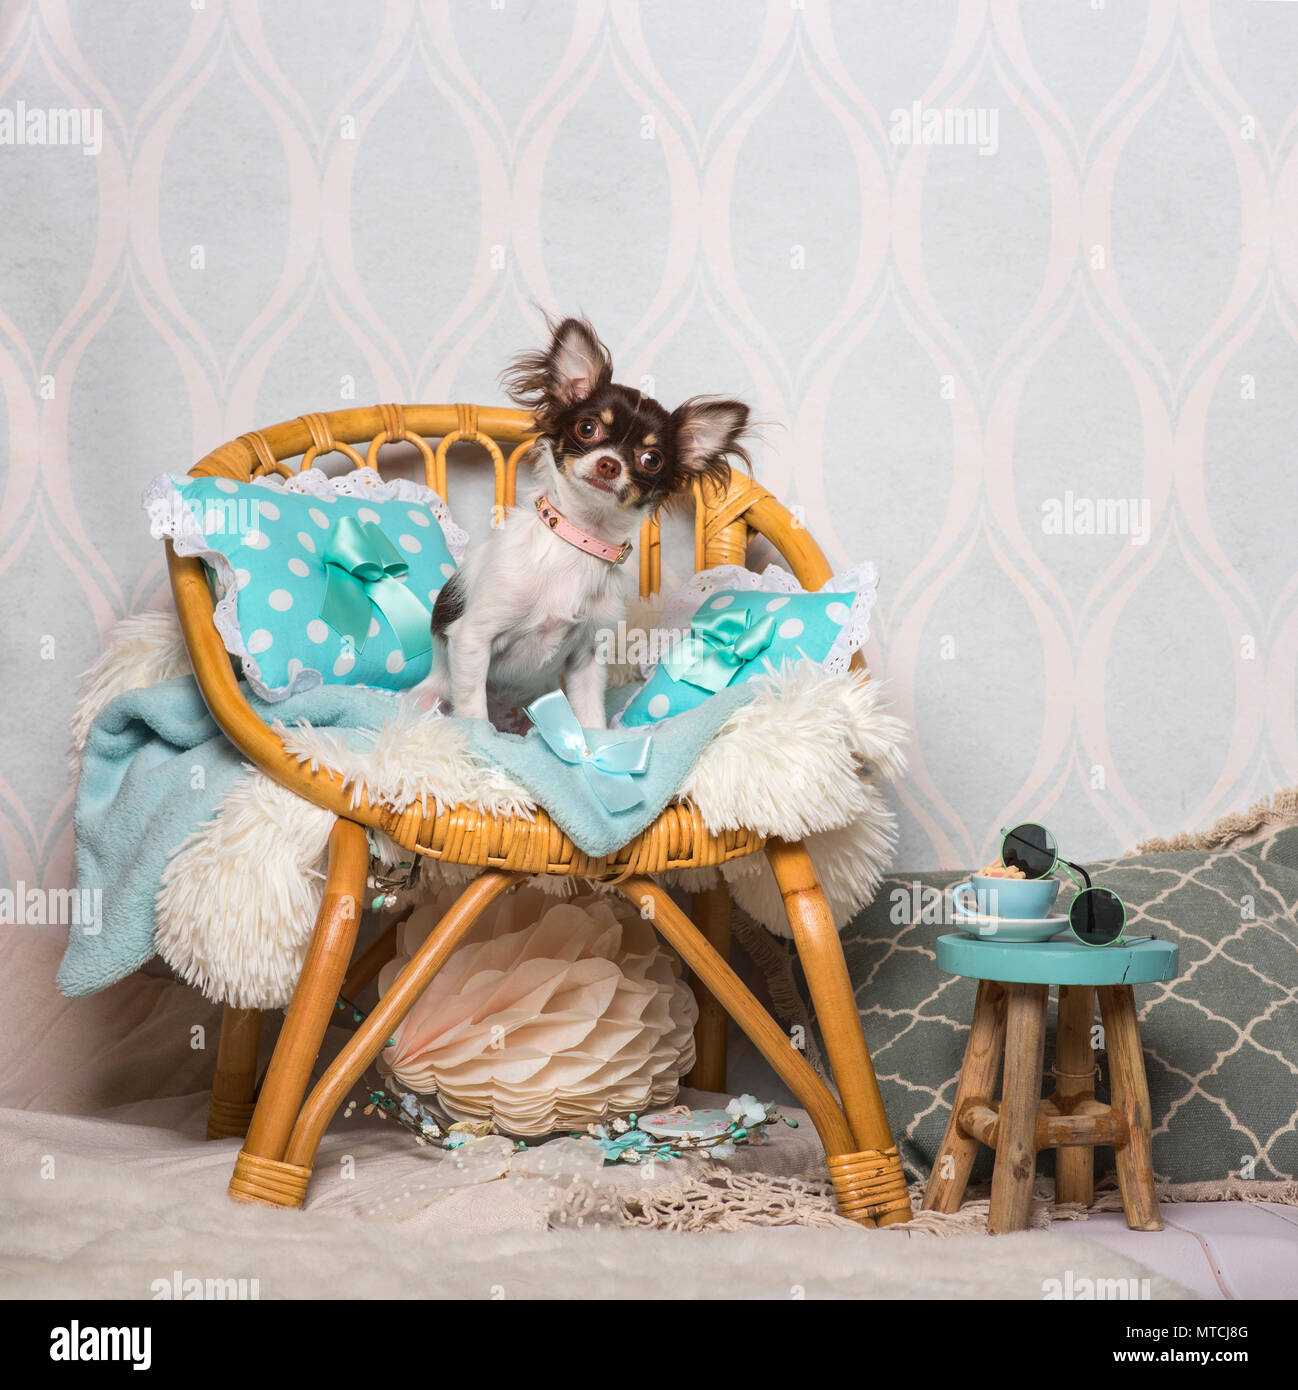 Chihuahua dog sitting on chair in studio, portrait Stock Photo